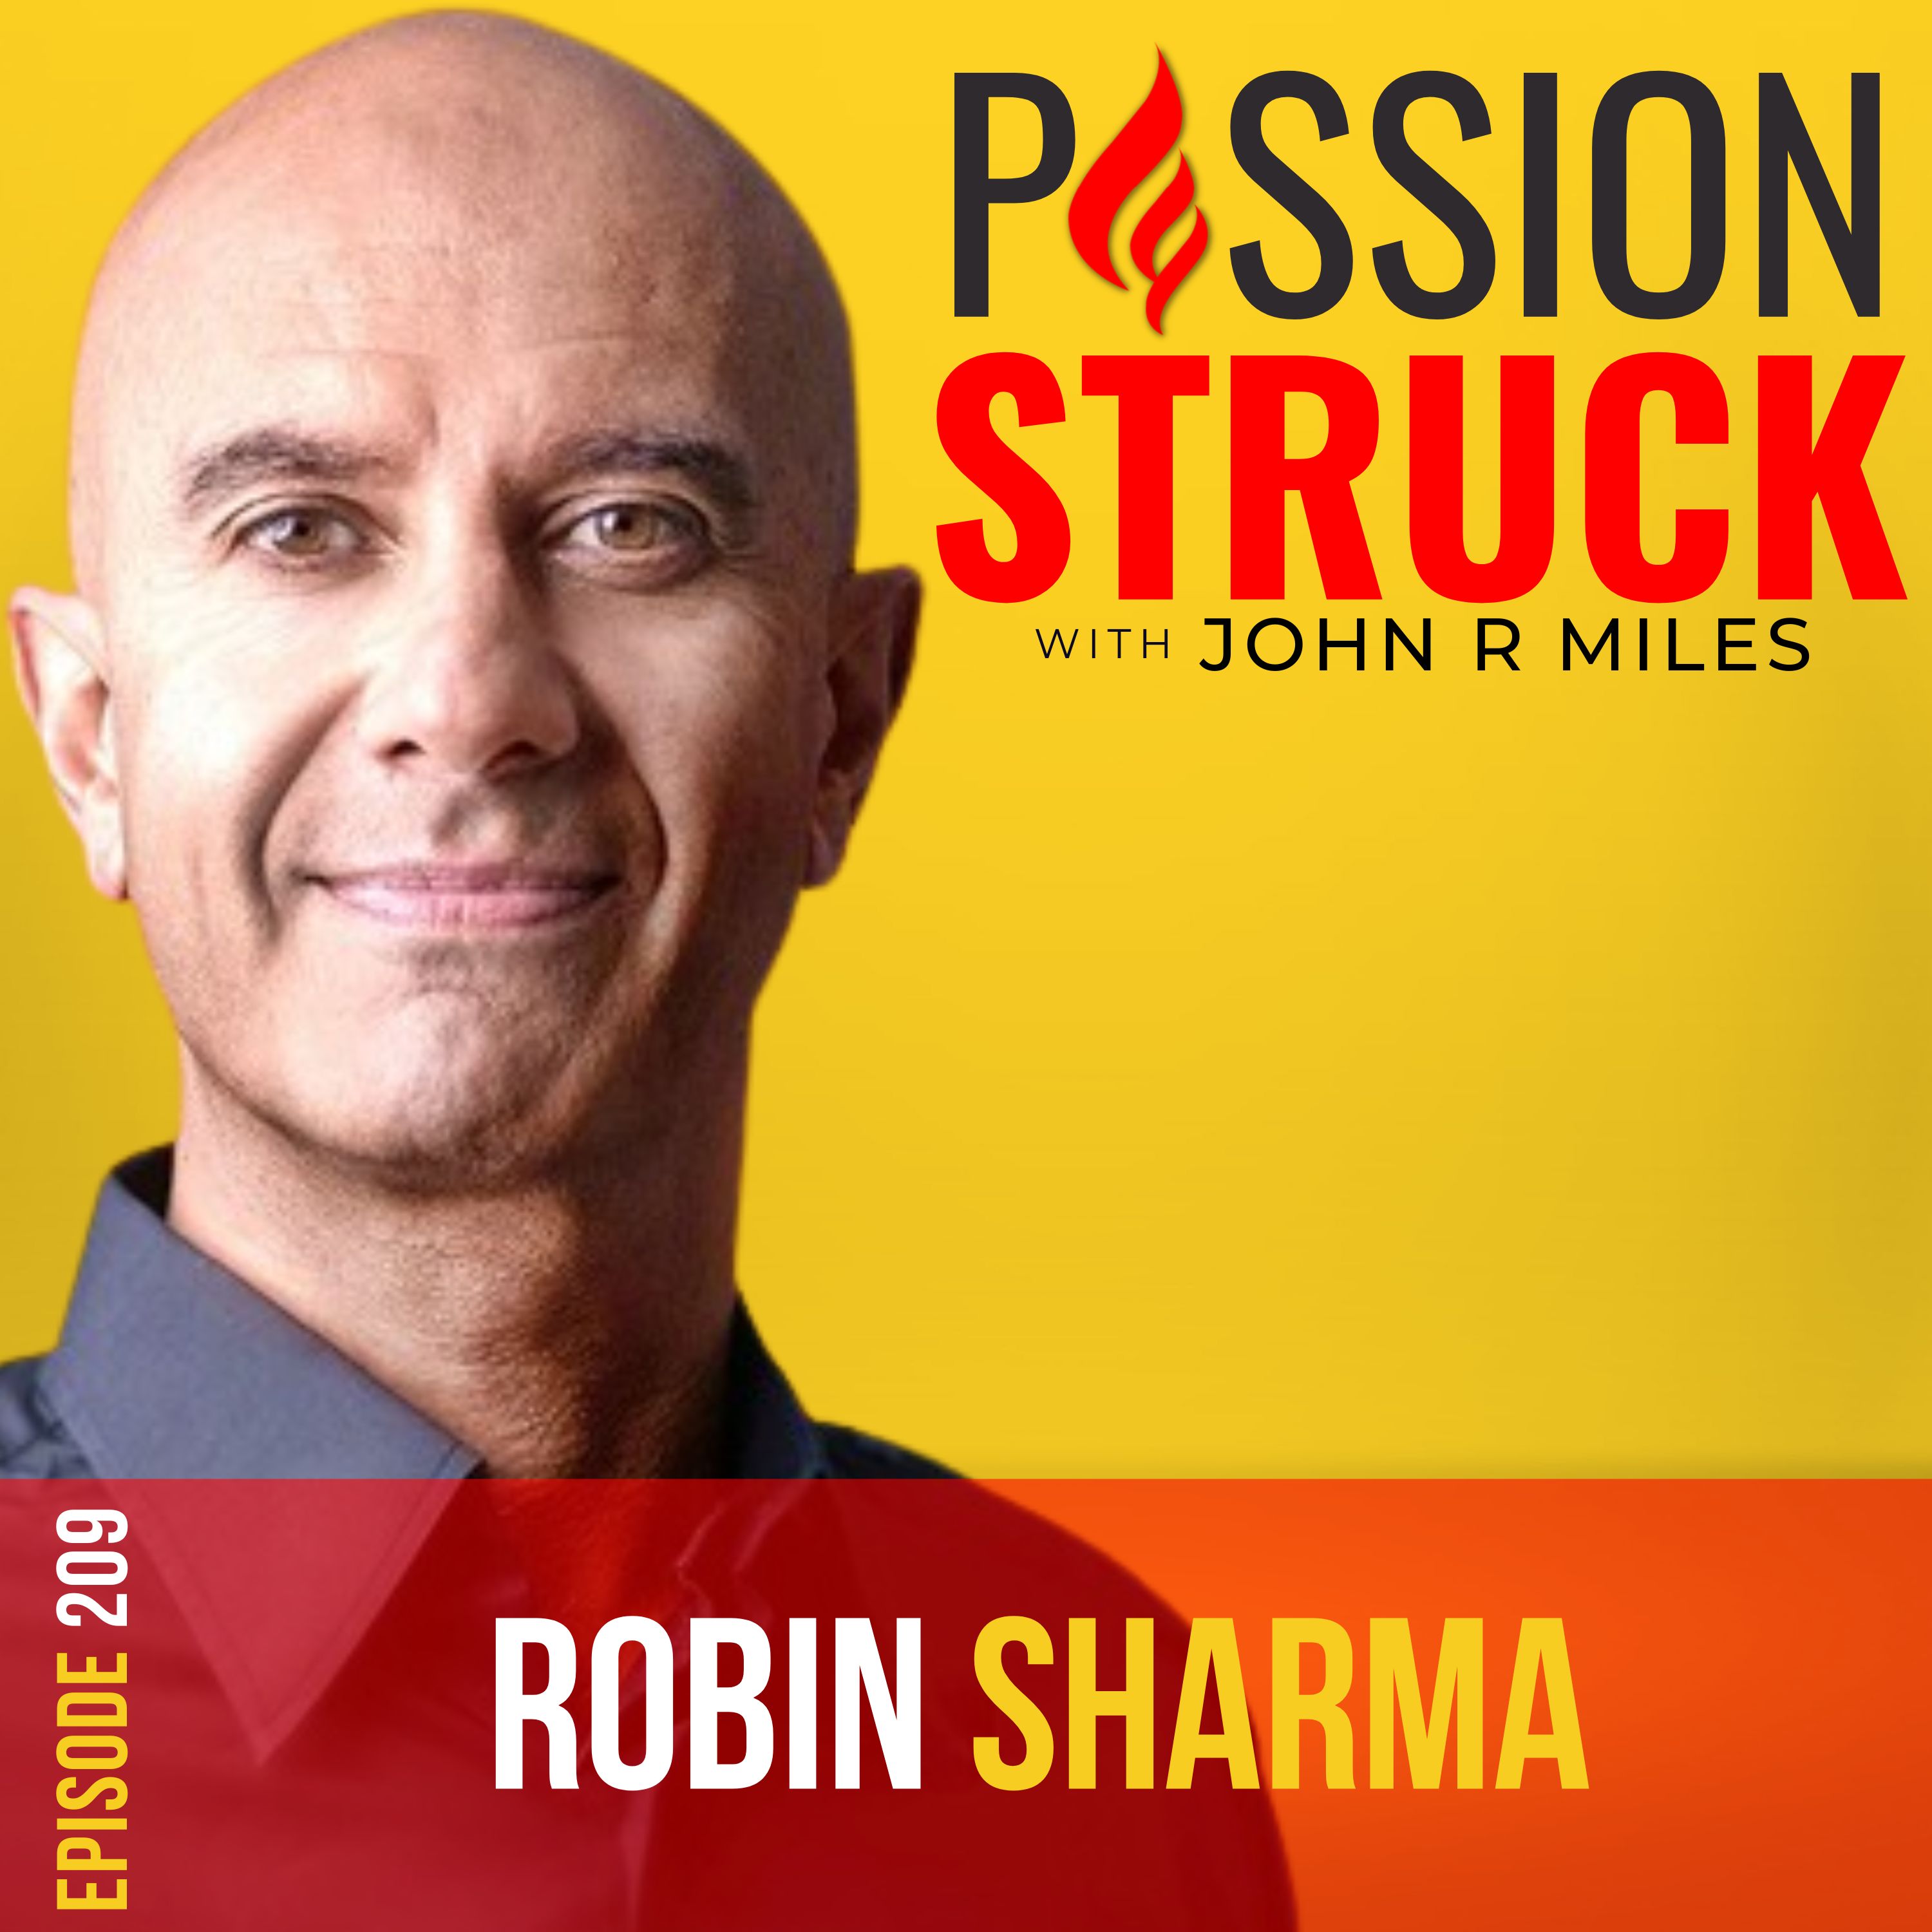 Passion Struck podcast album cover for episode 209 featuring Robin Sharma